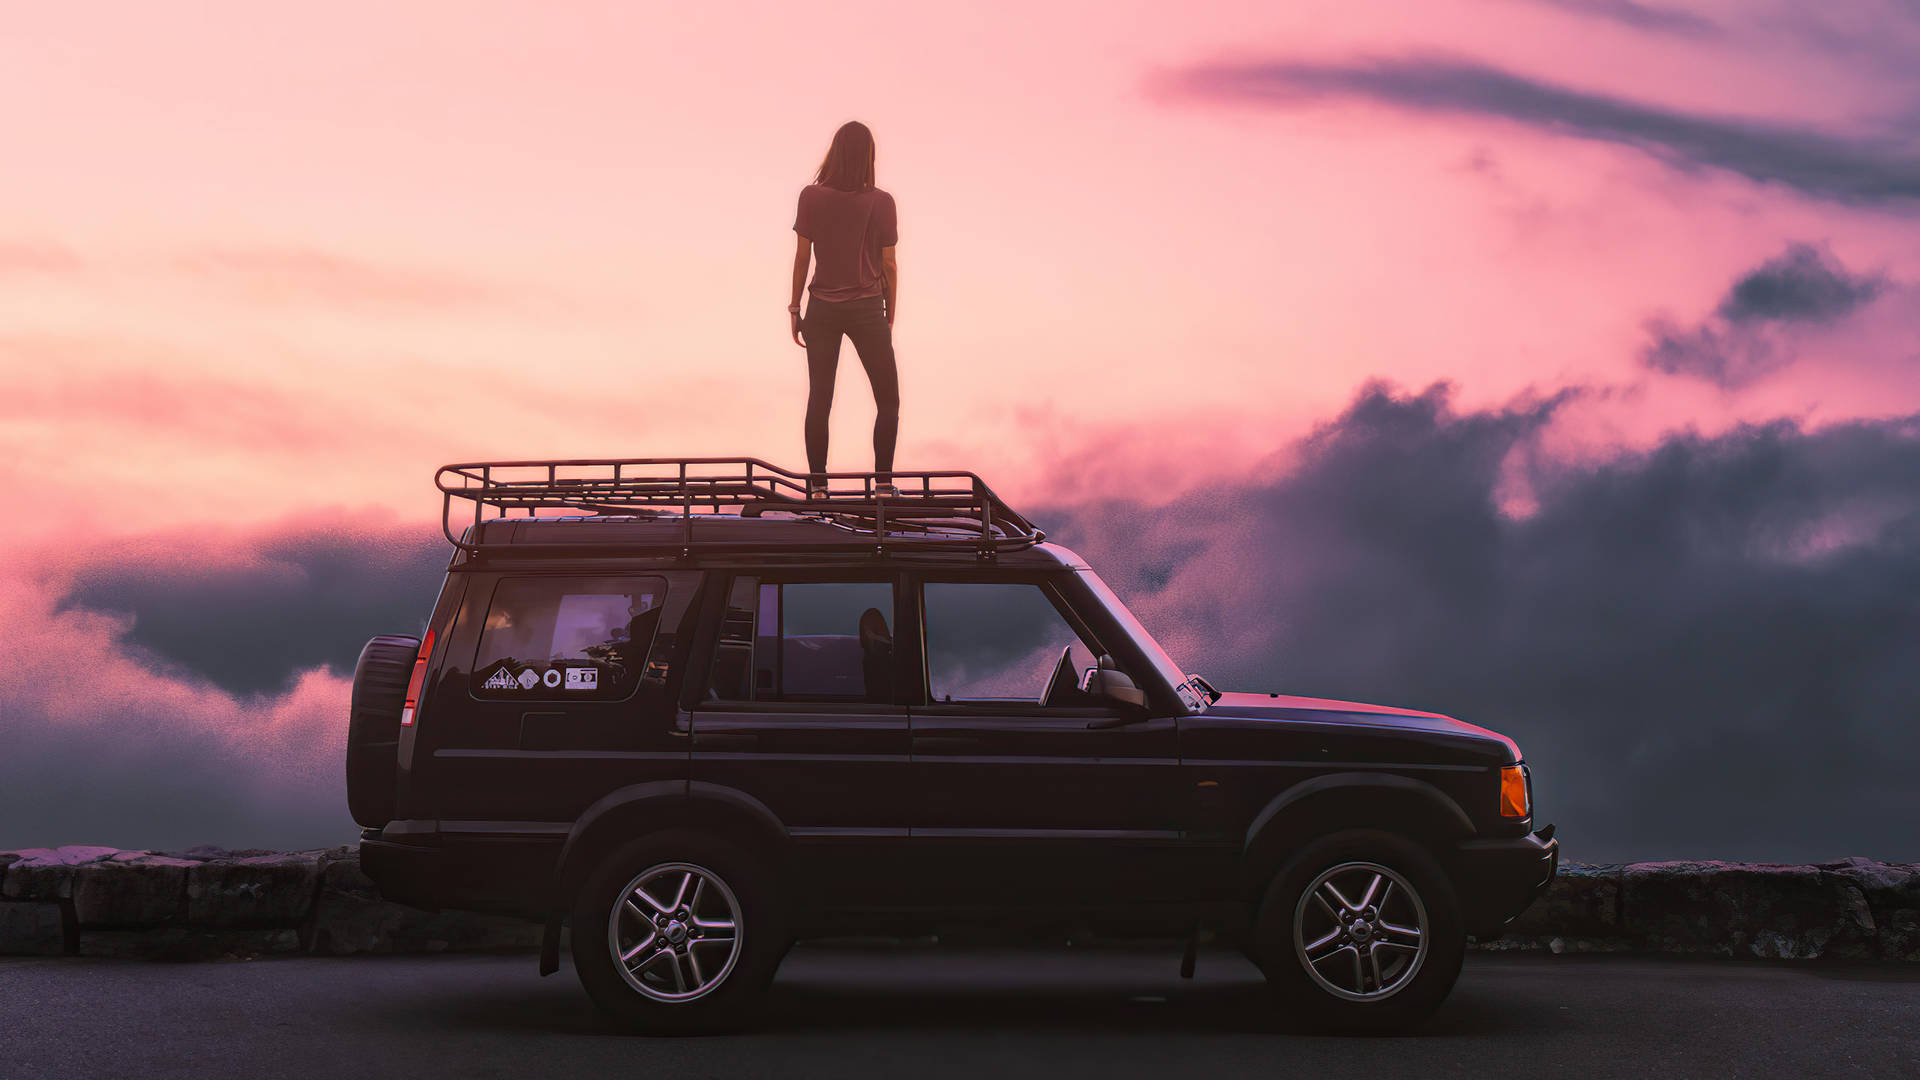 Aesthetic 4k Car With Woman On Top